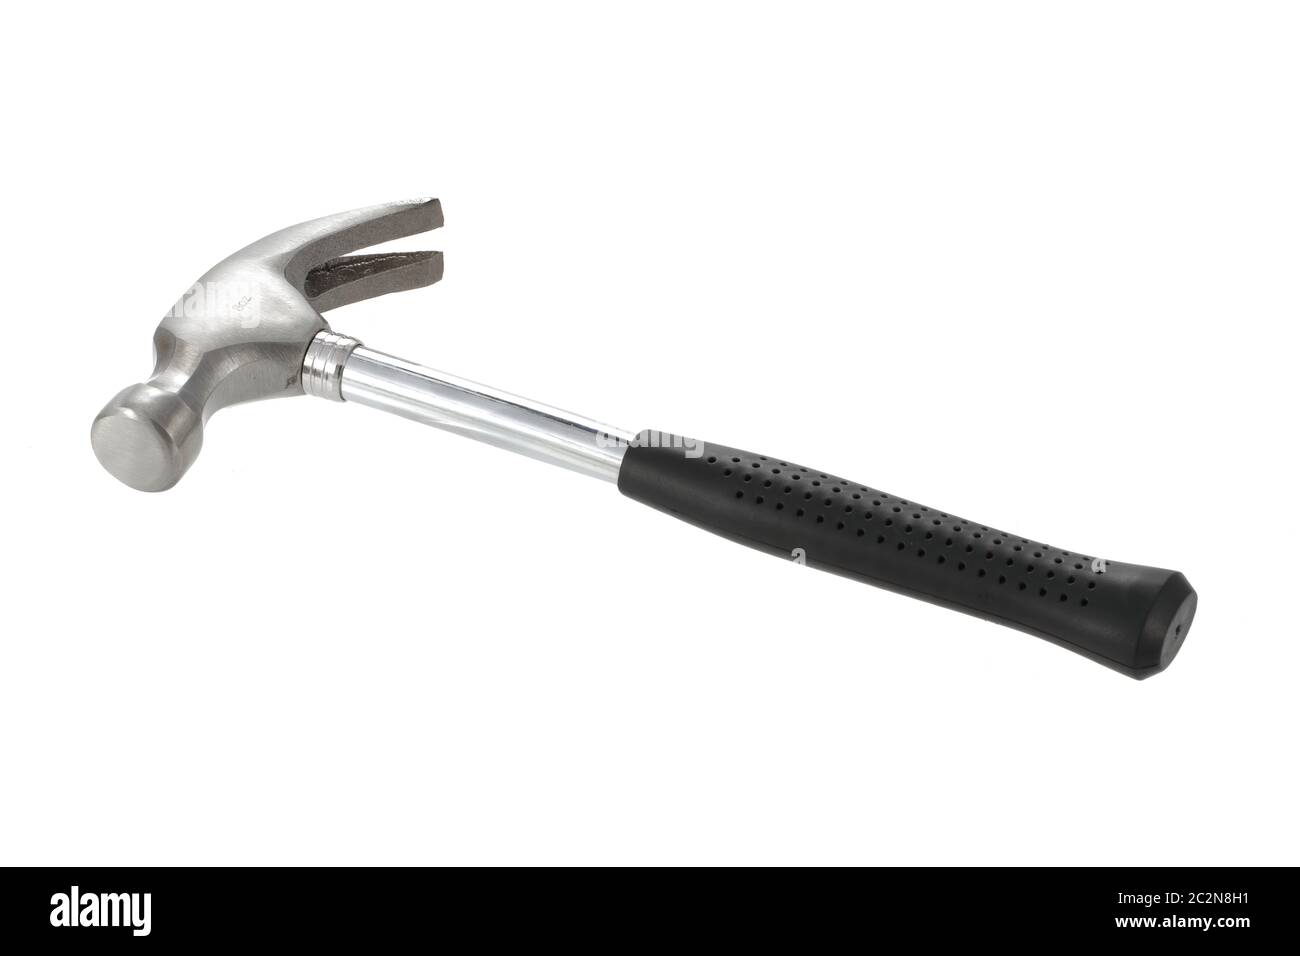 Small 8oz claw hammer isolated on a white bacgrond Stock Photo